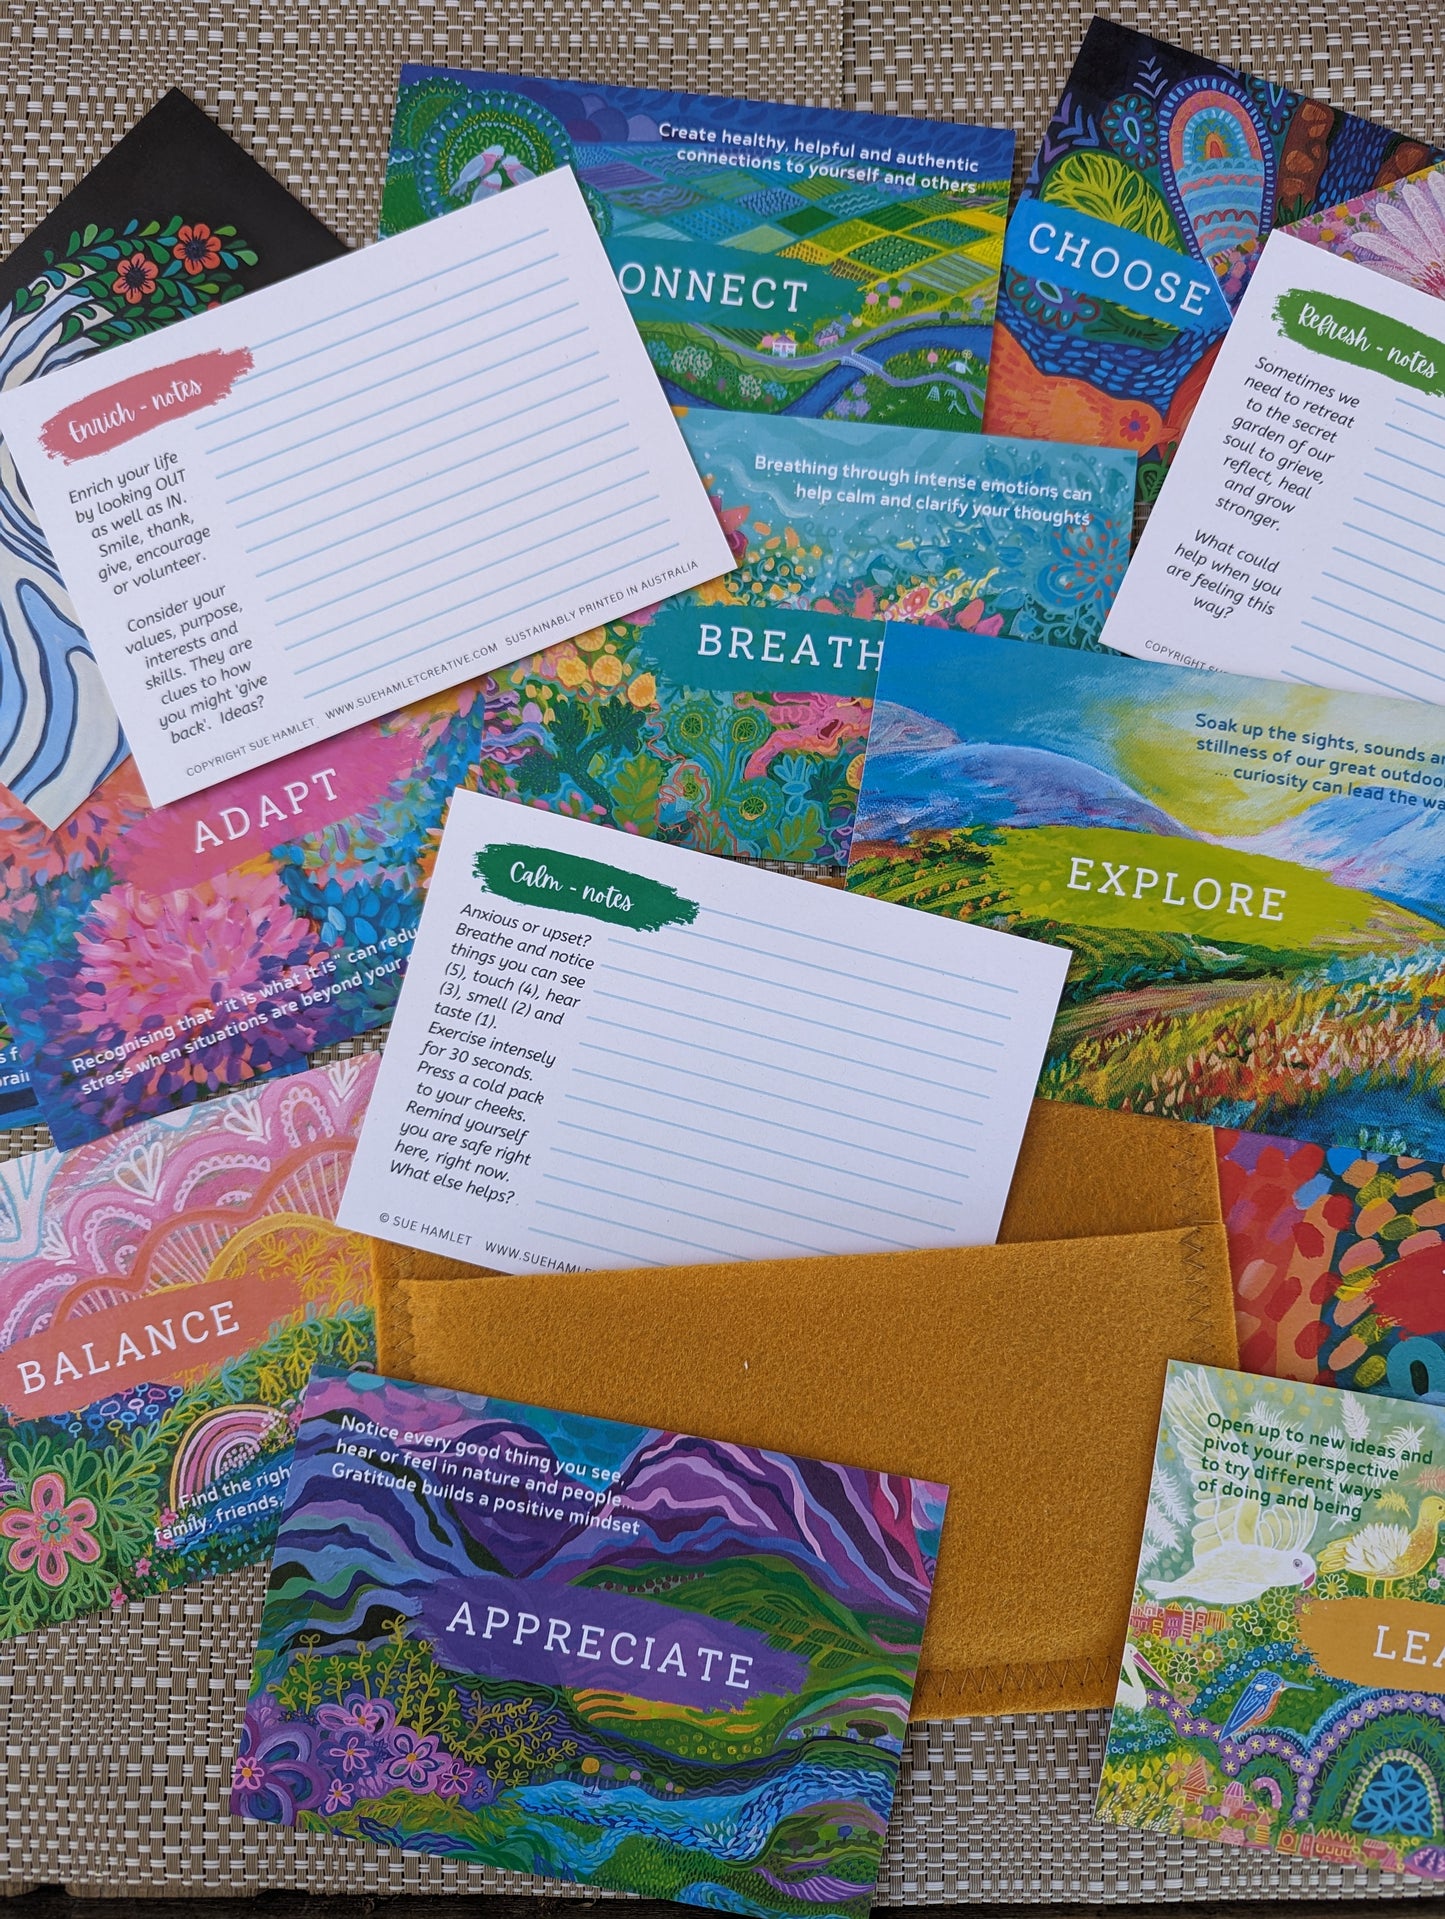 Uplifting Art Cards COMPLETE pack in felt pouch (set of 16)